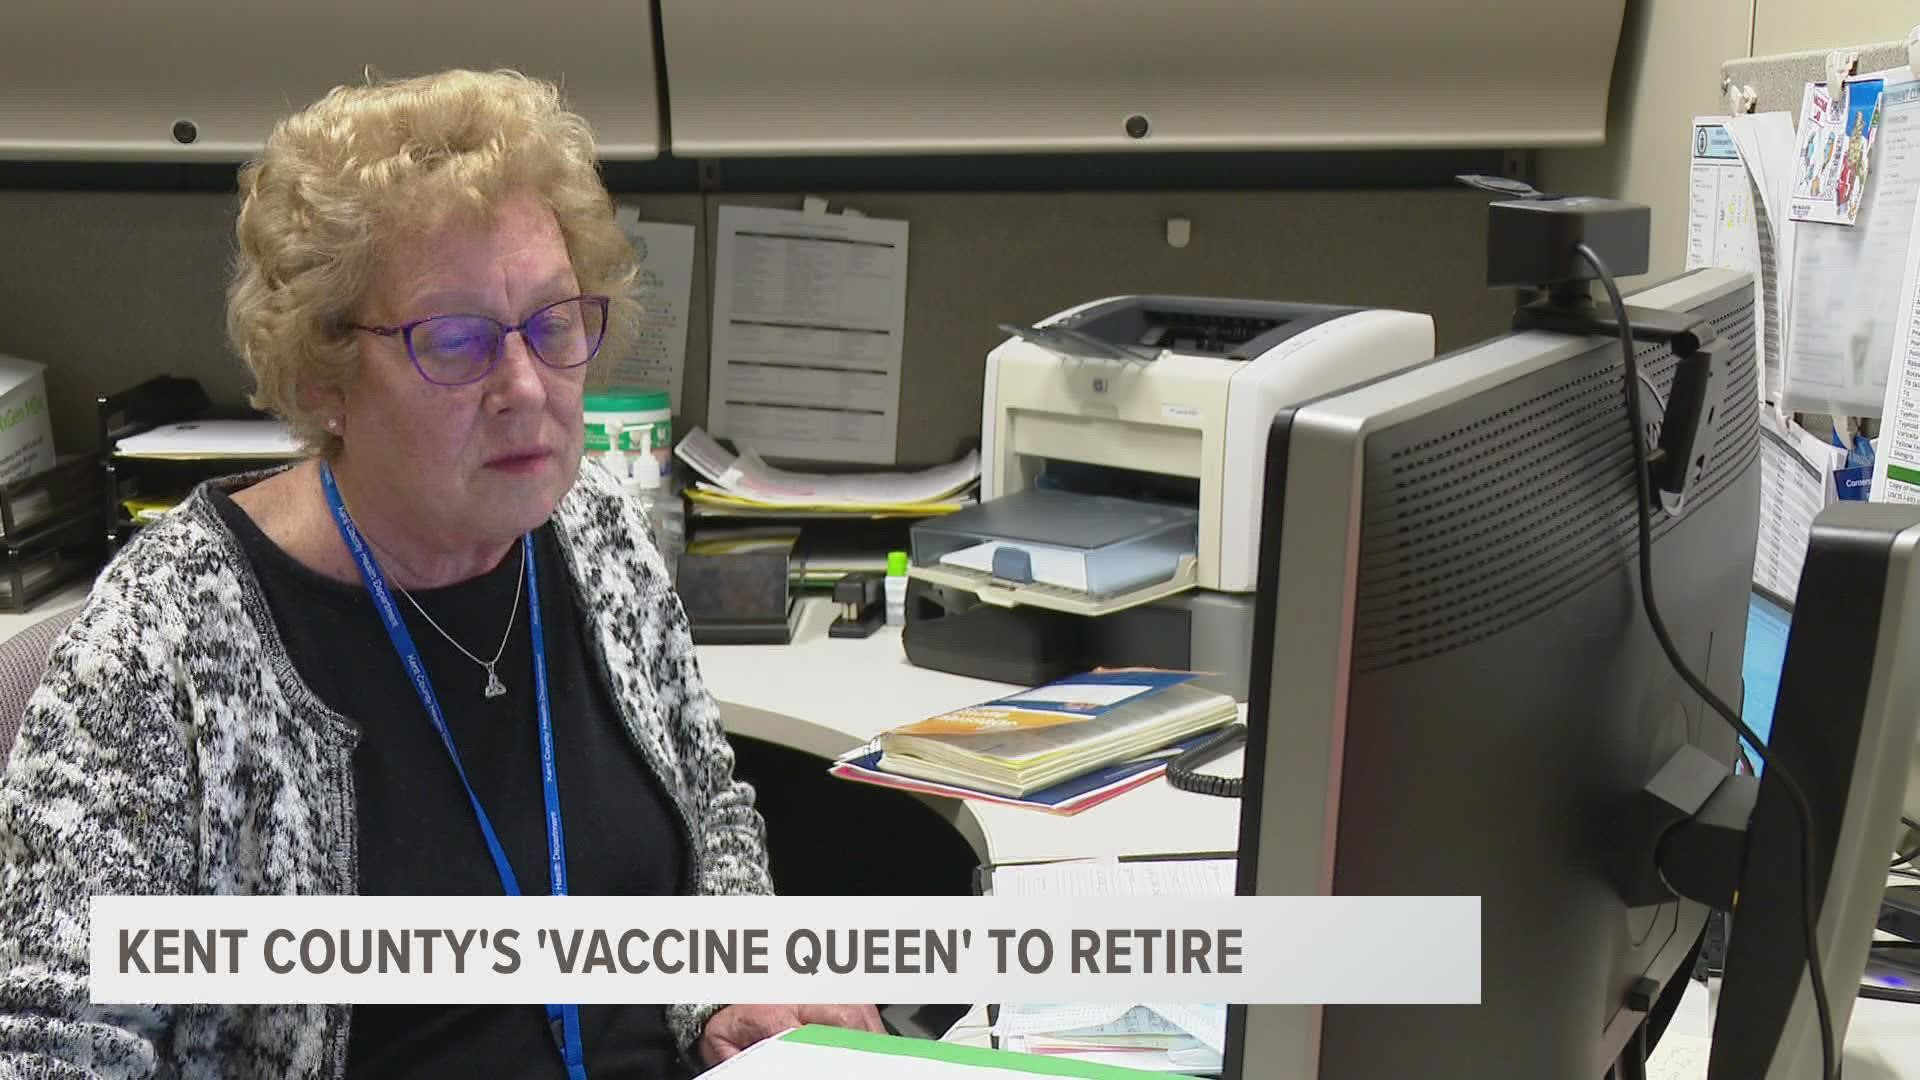 Mary Wisinski has been the Kent County Health Department's immunization program supervisor for the past 15 years. She plans to retire in April.